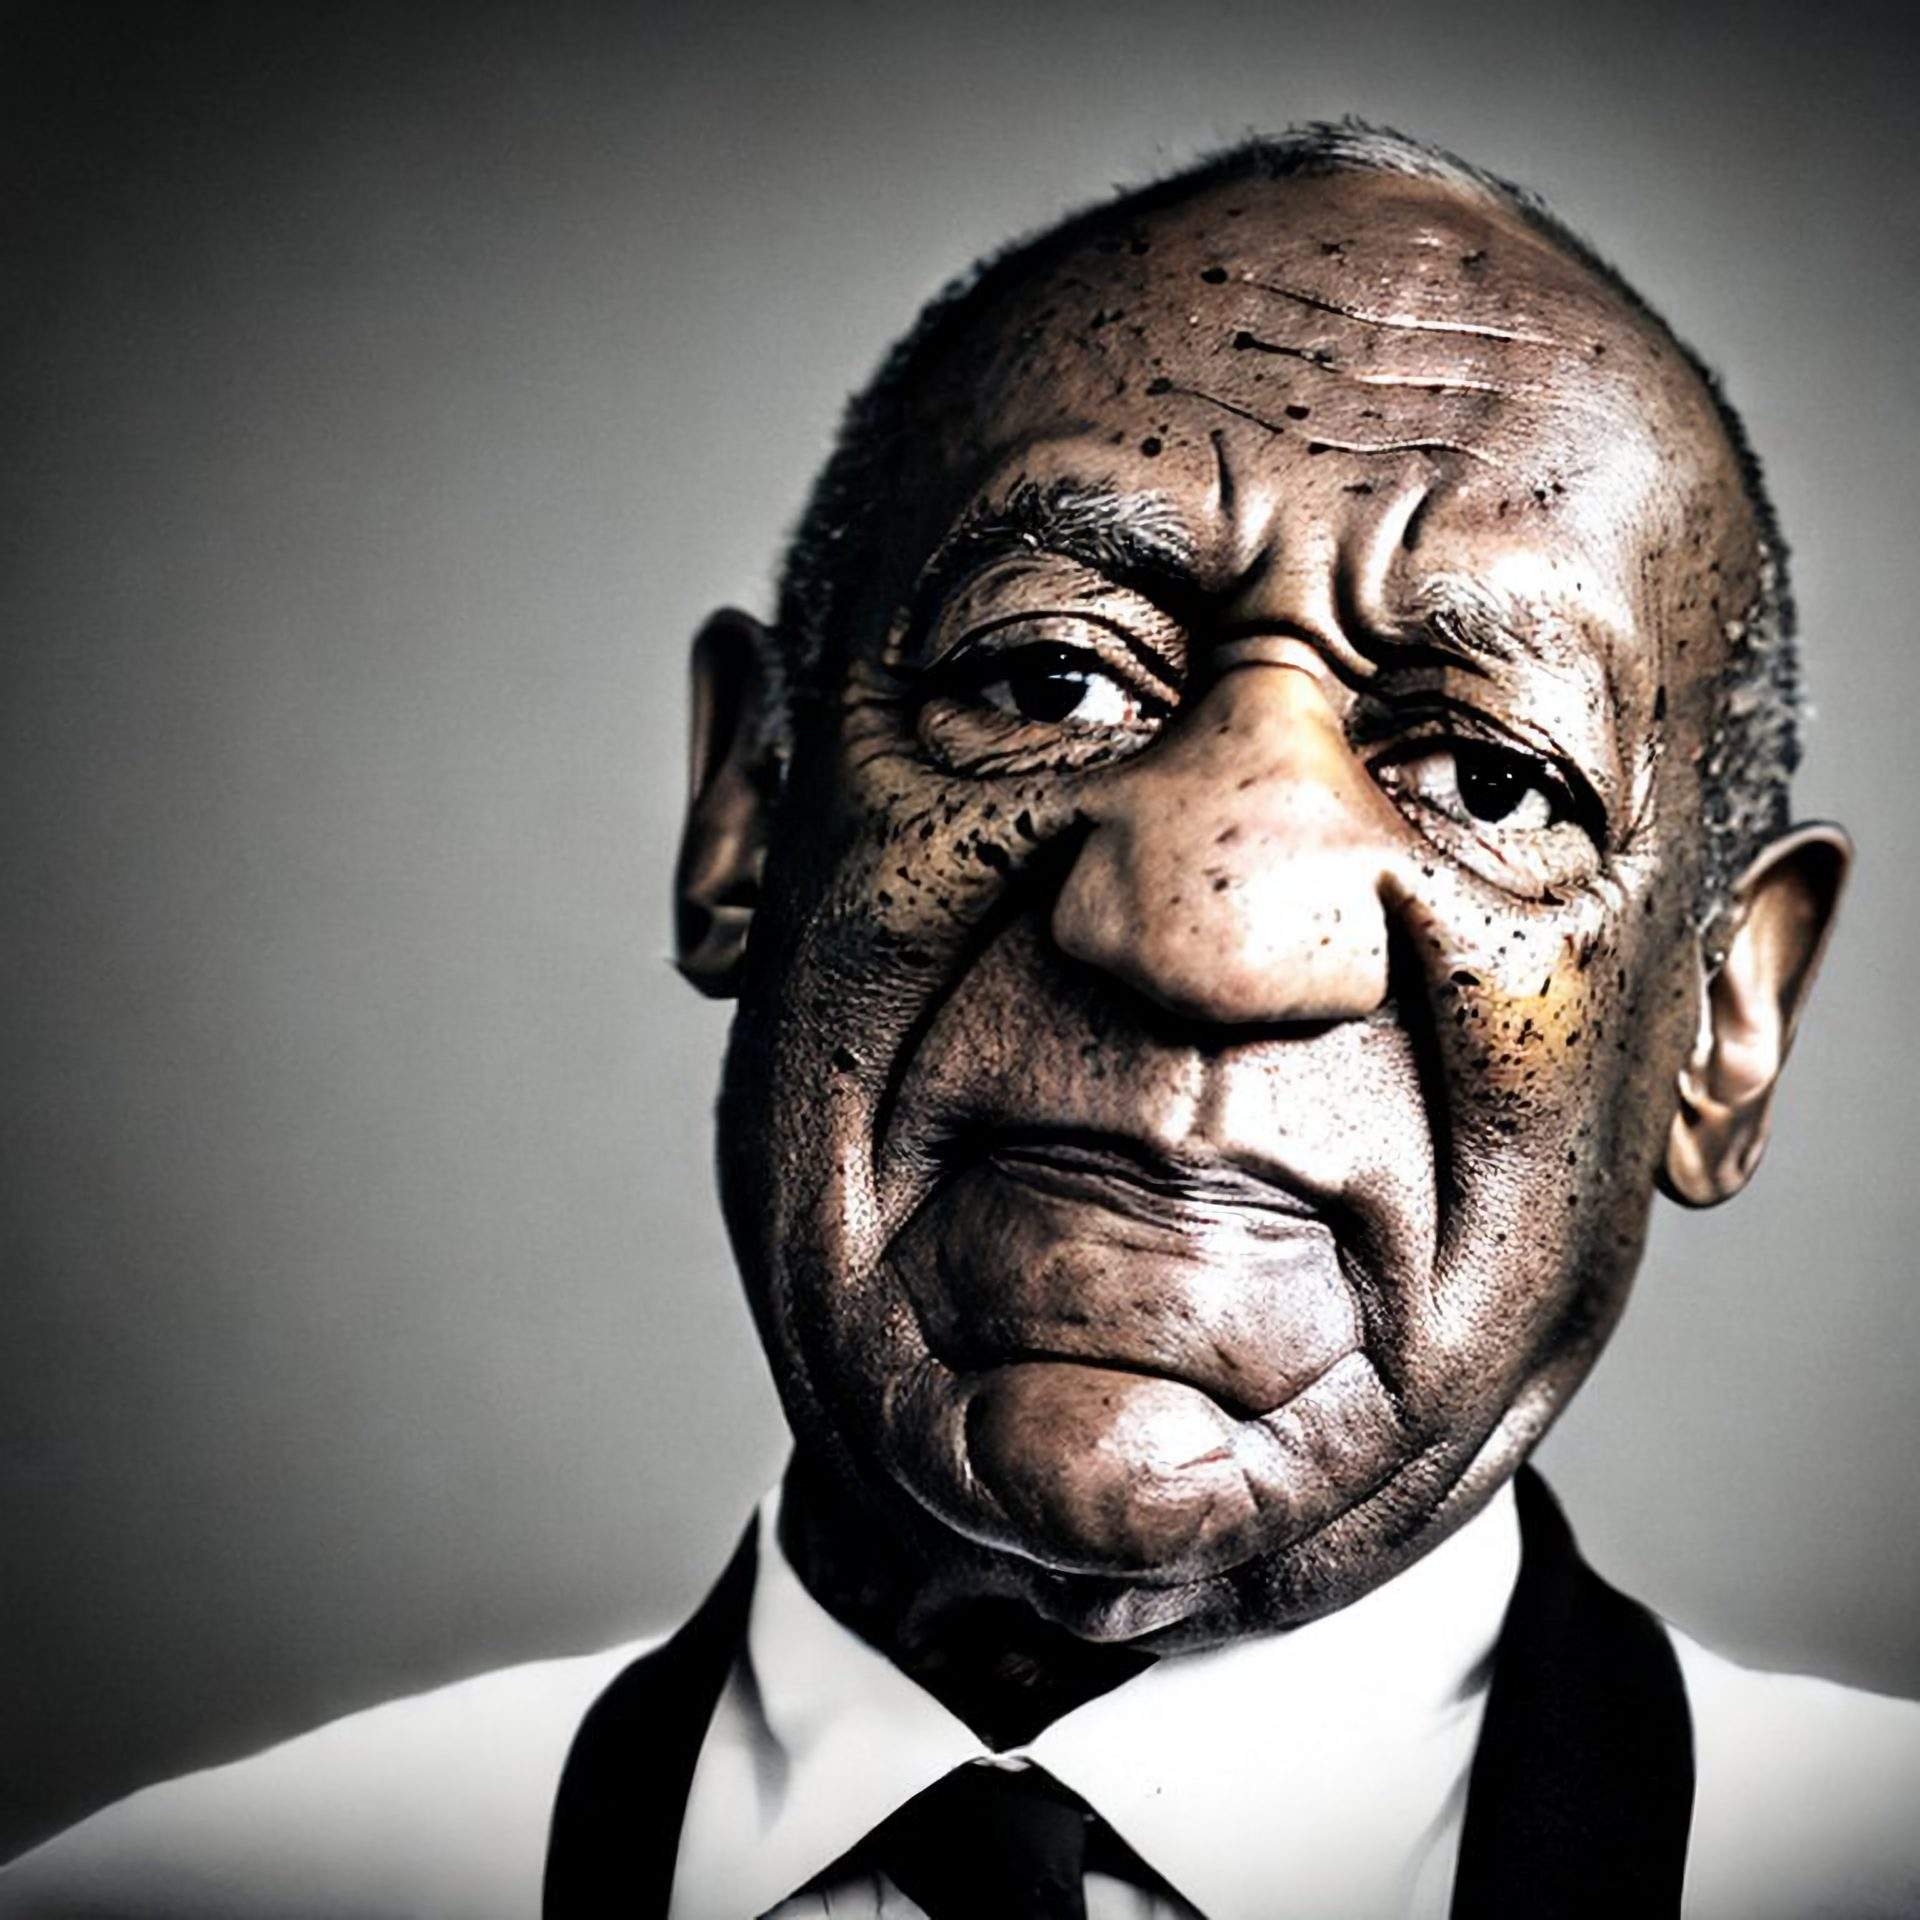 Iconic portrait of Bill Cosby